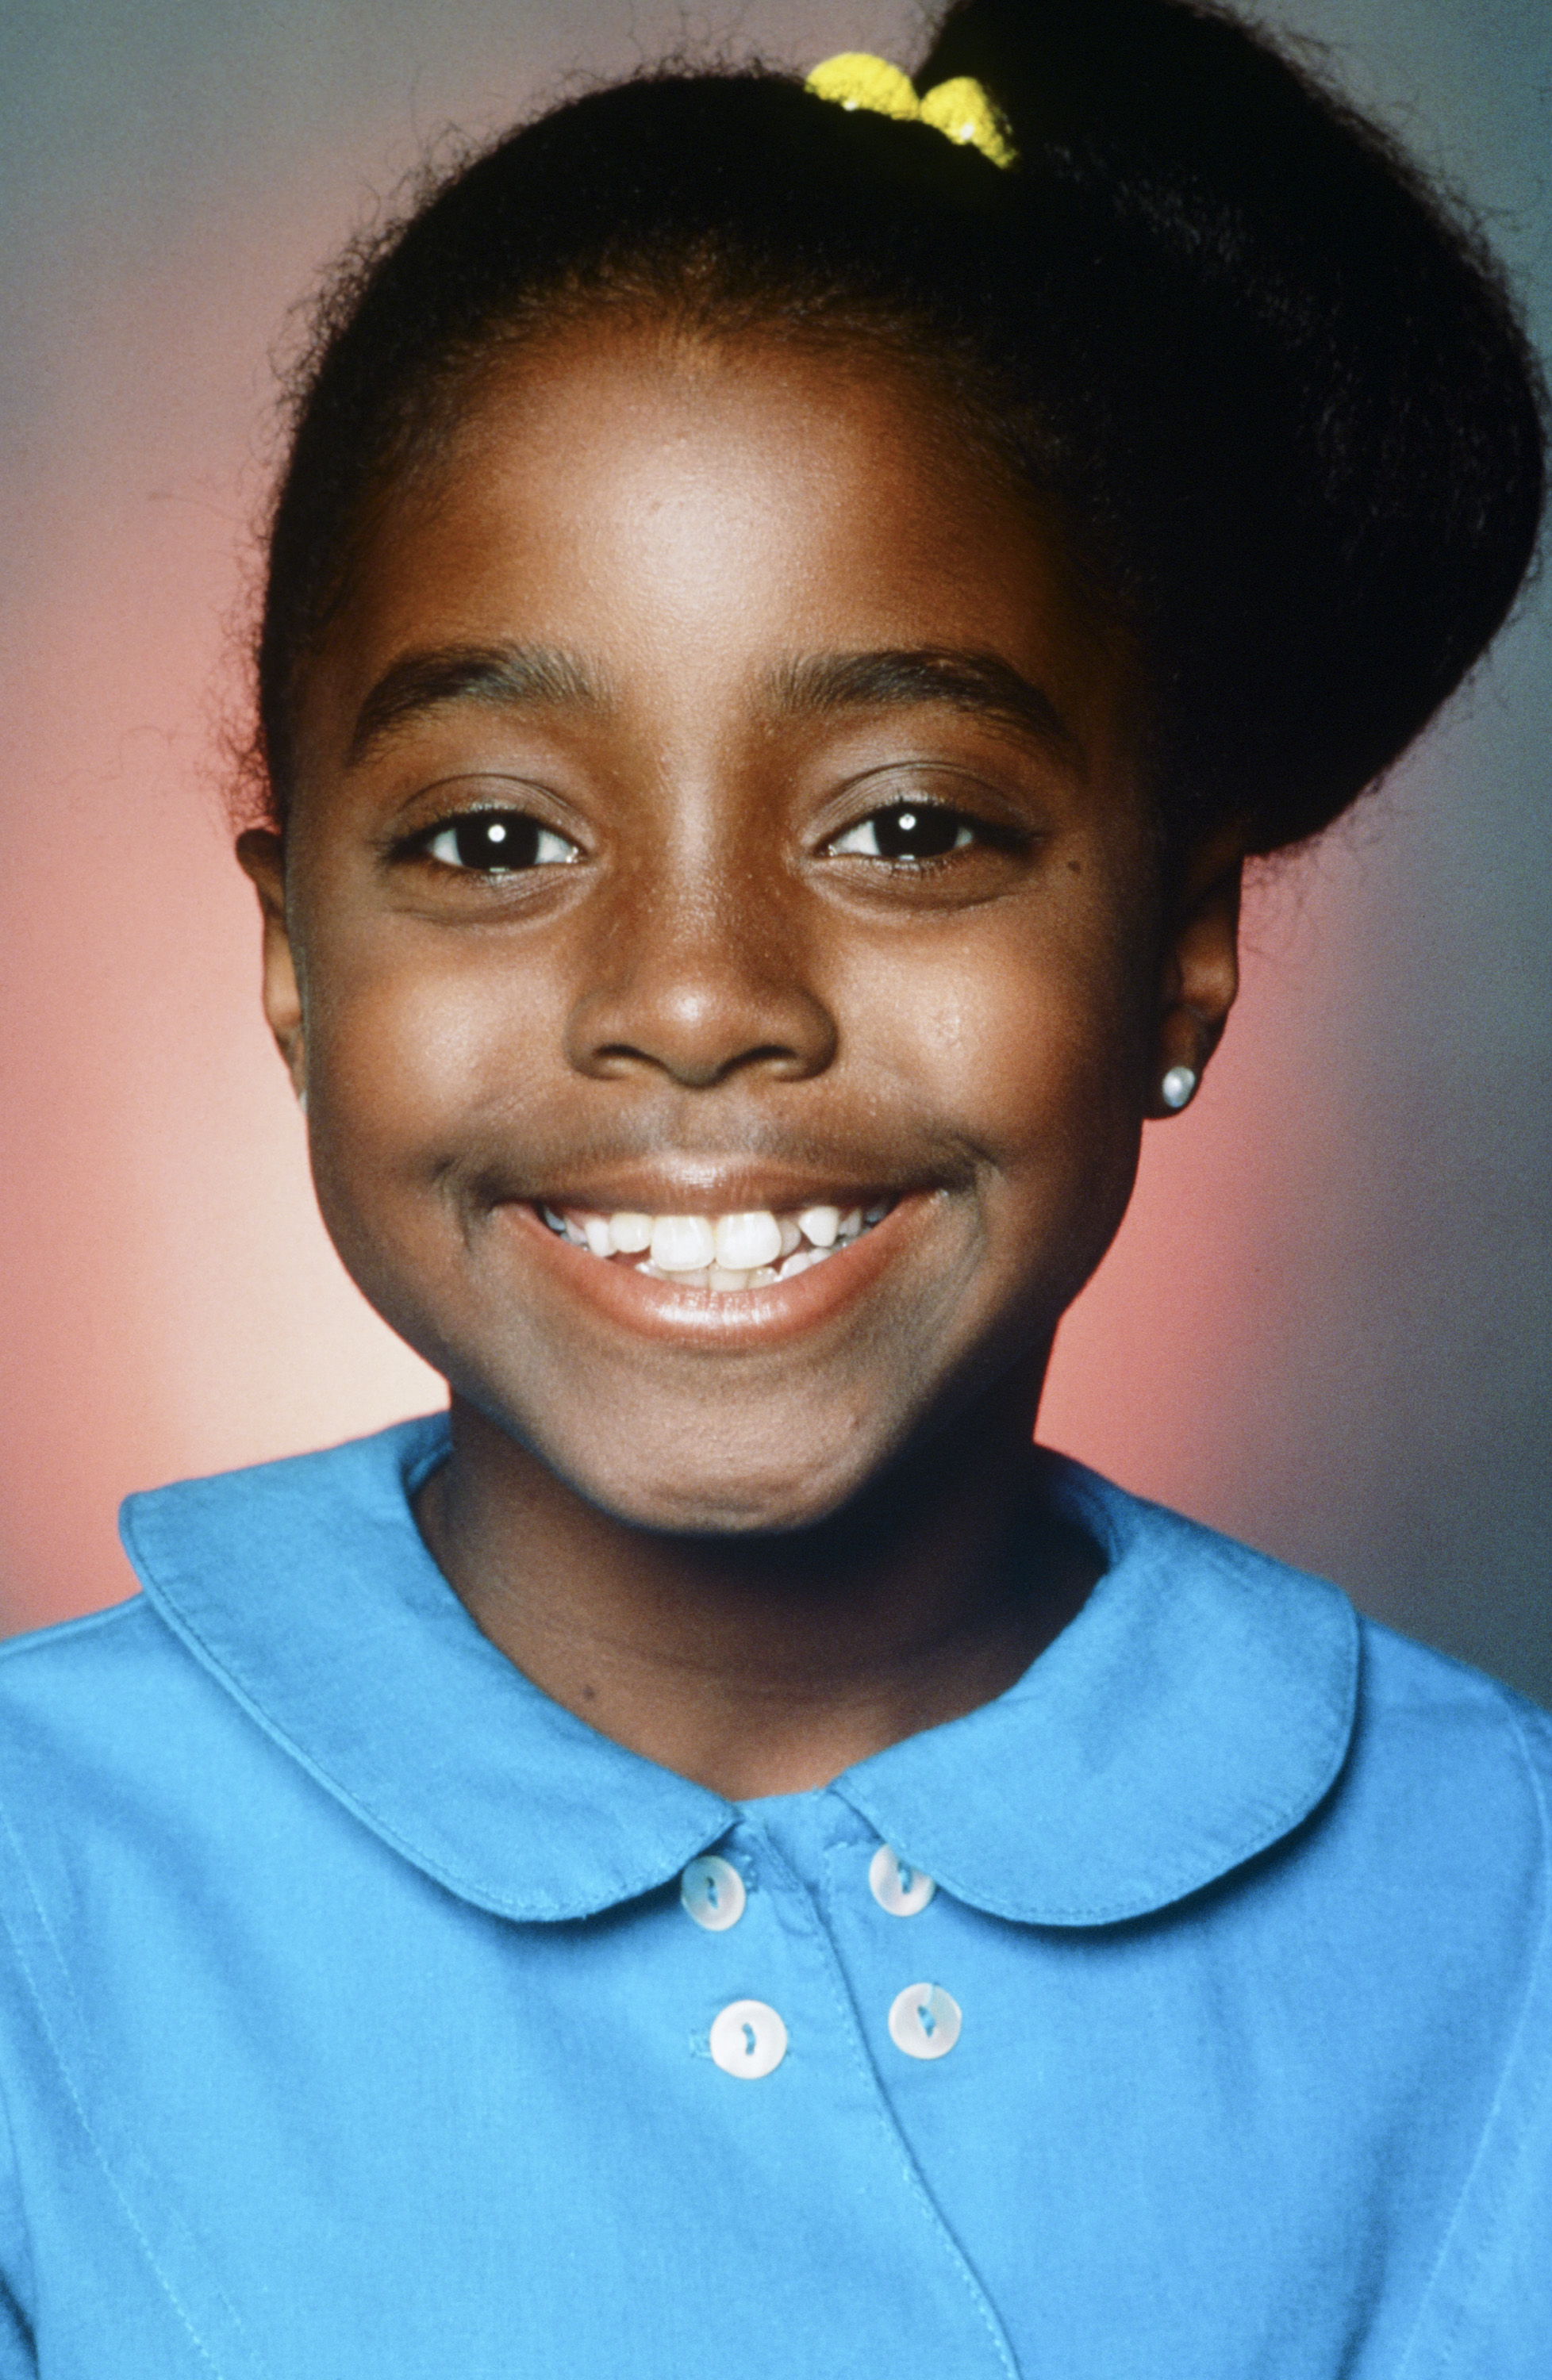 Keshia Knight Pulliam as Rudy Huxtable on "The Cosby Show" | Source: Getty Images